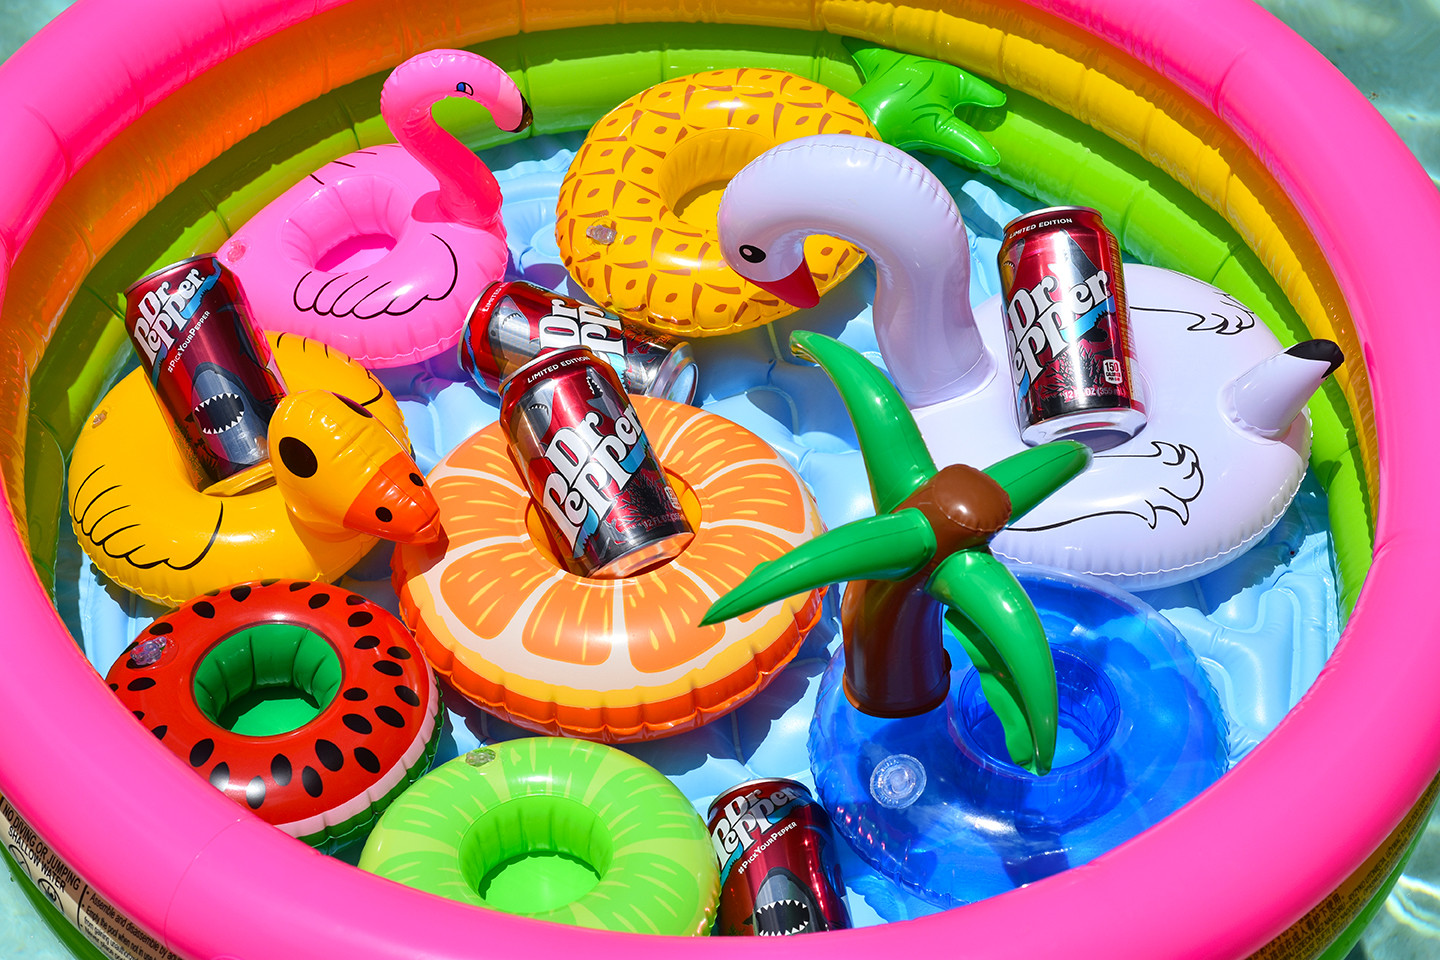 Pool Party Ideas Adults
 Pool Party Ideas for Adults • Happy Family Blog